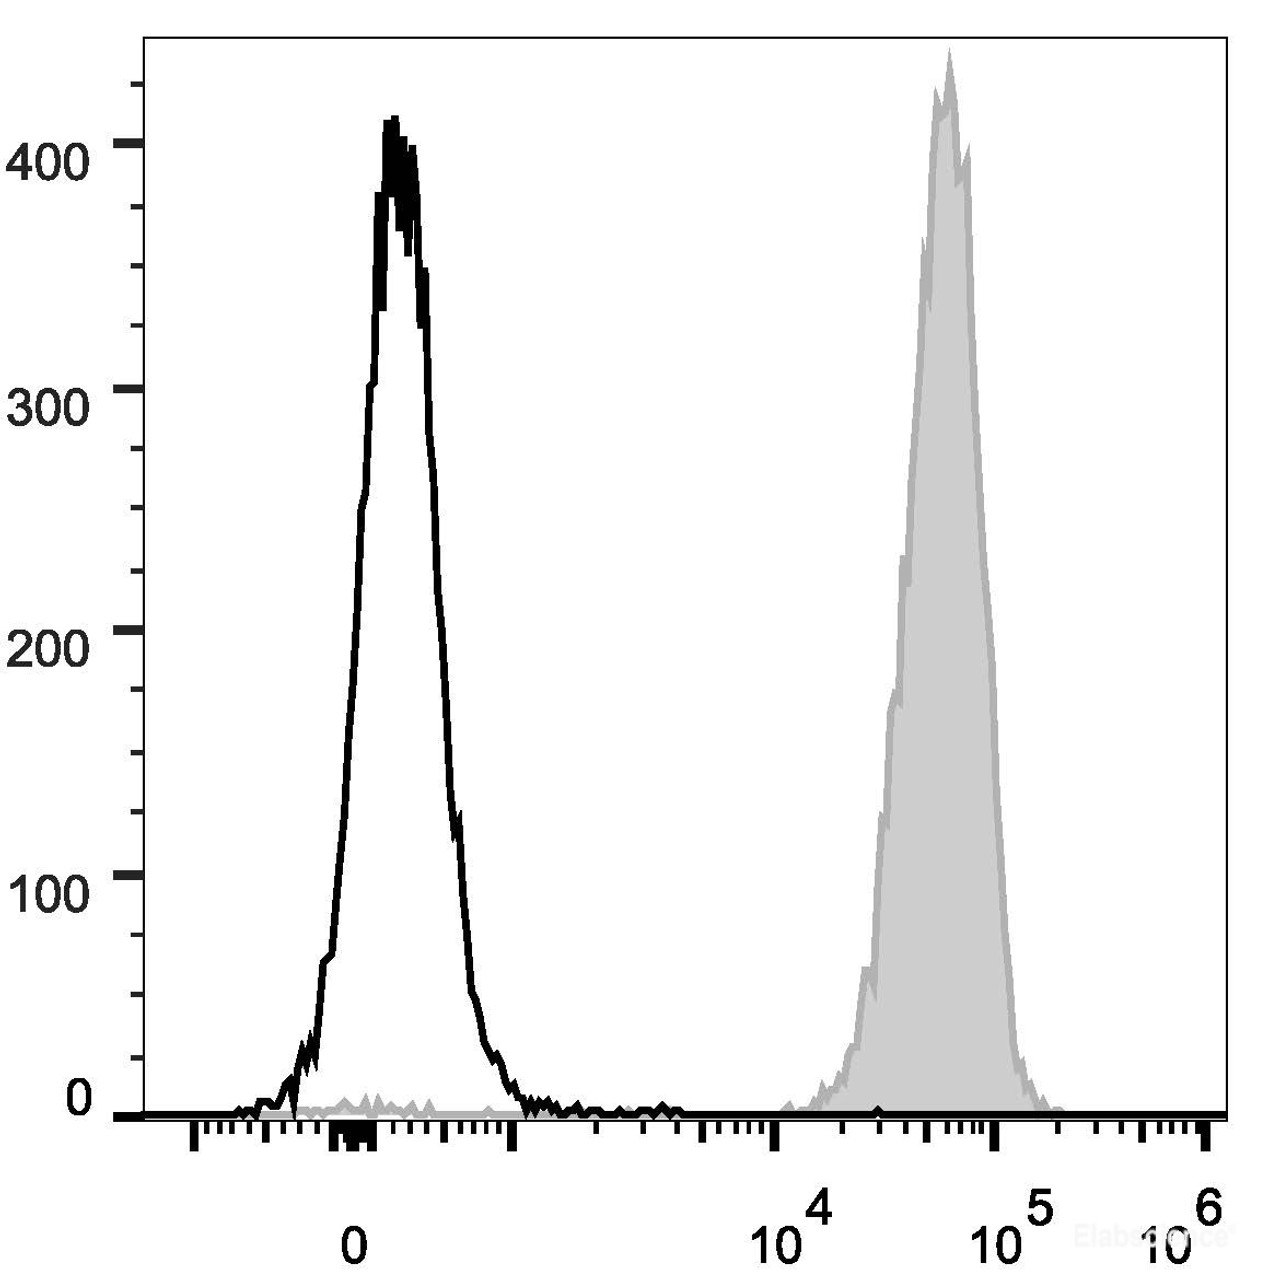 C57BL/6 murine splenocytes are stained with PE Anti-Mouse CD45 Antibody(filled gray histogram). Unstained splenocytes (empty black histogram) are used as control.